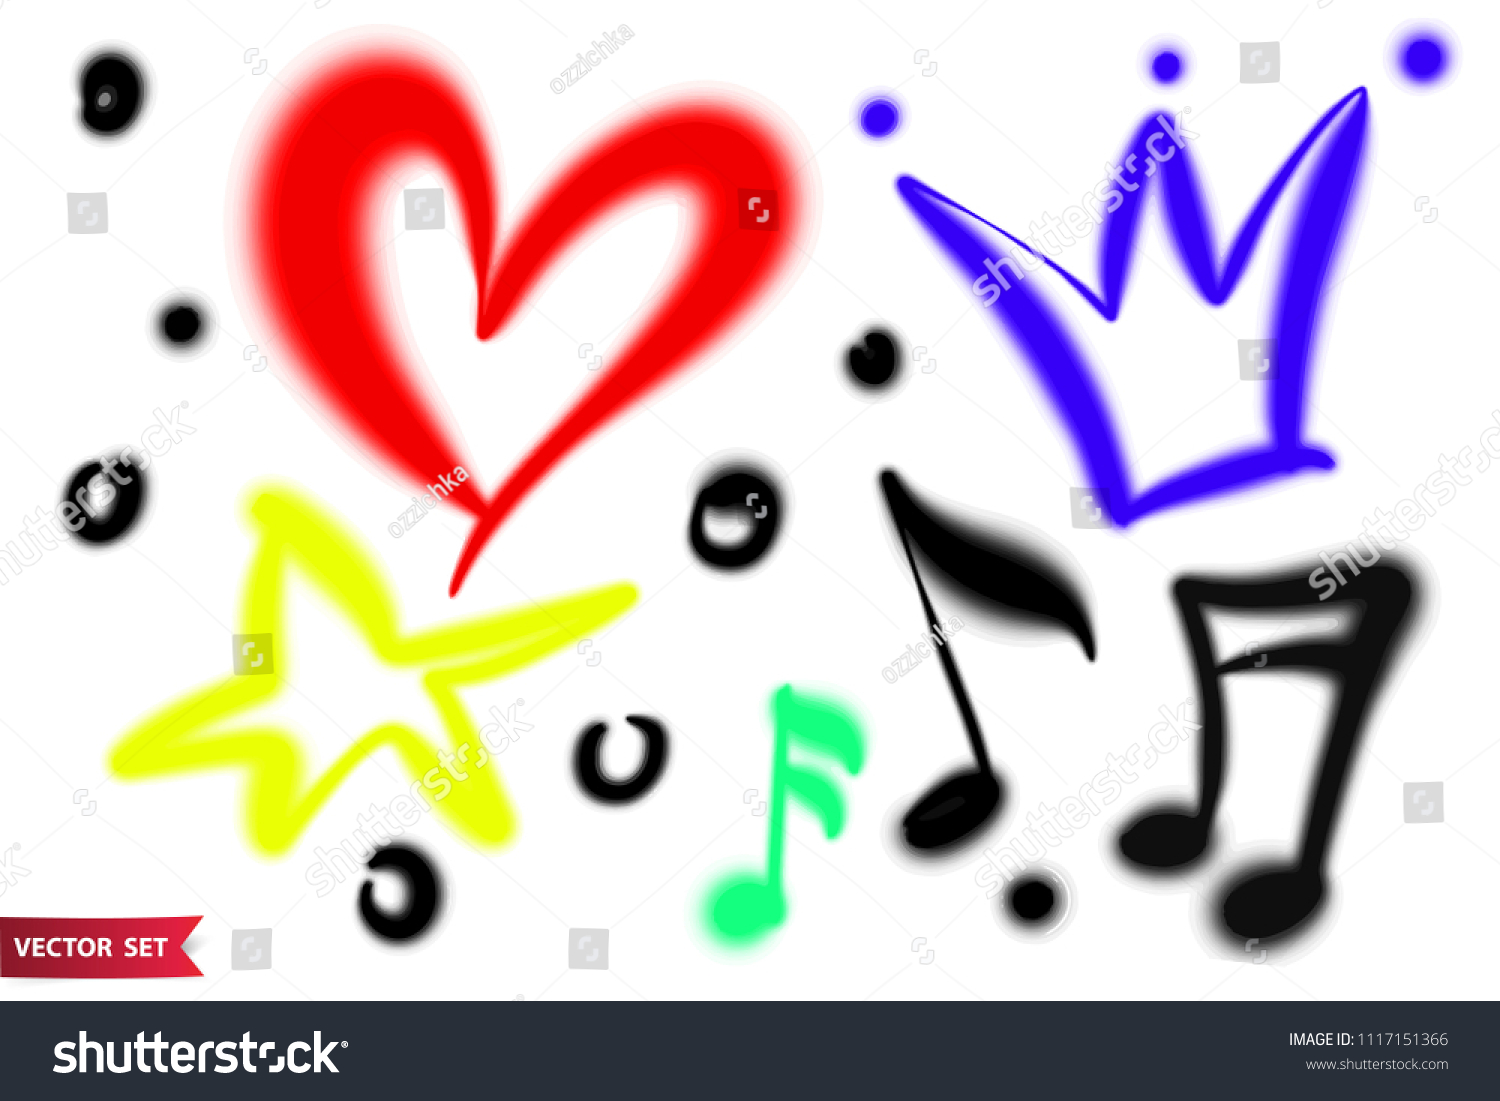 SVG of Vector set of hand drawn airbrush symbols. Various color hand drawn crown, heart, star and music sheets. svg